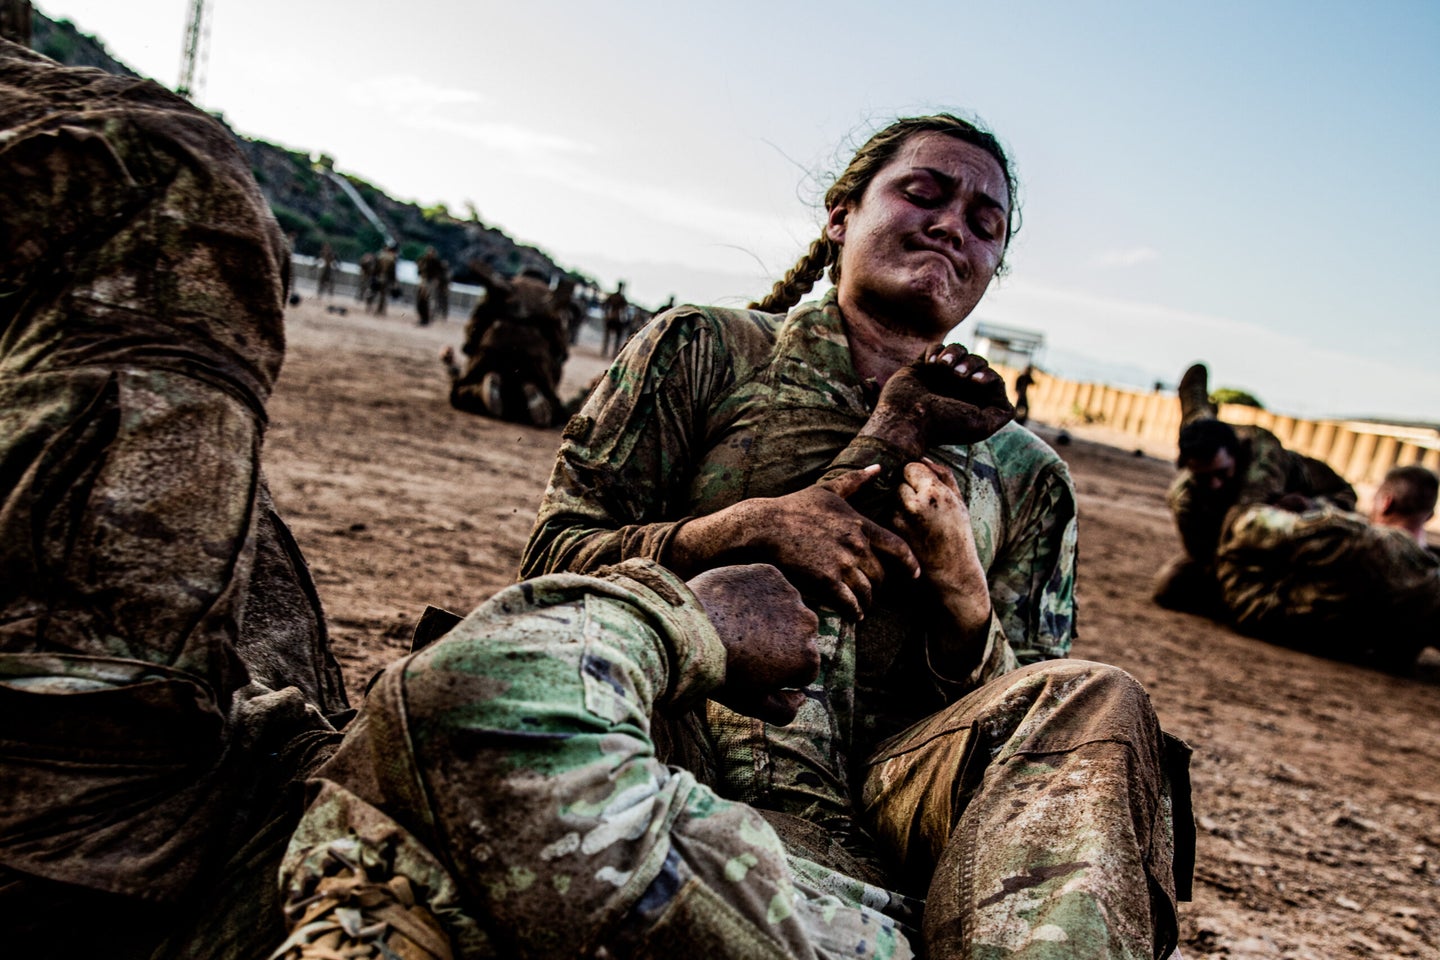 U.S. Army Sgt. Liliana Munday was one of a few dozen troops who completed the French Desert Commando Course in November in Djibouti. (U.S. Army photo by Sgt. Haden Tolbert)